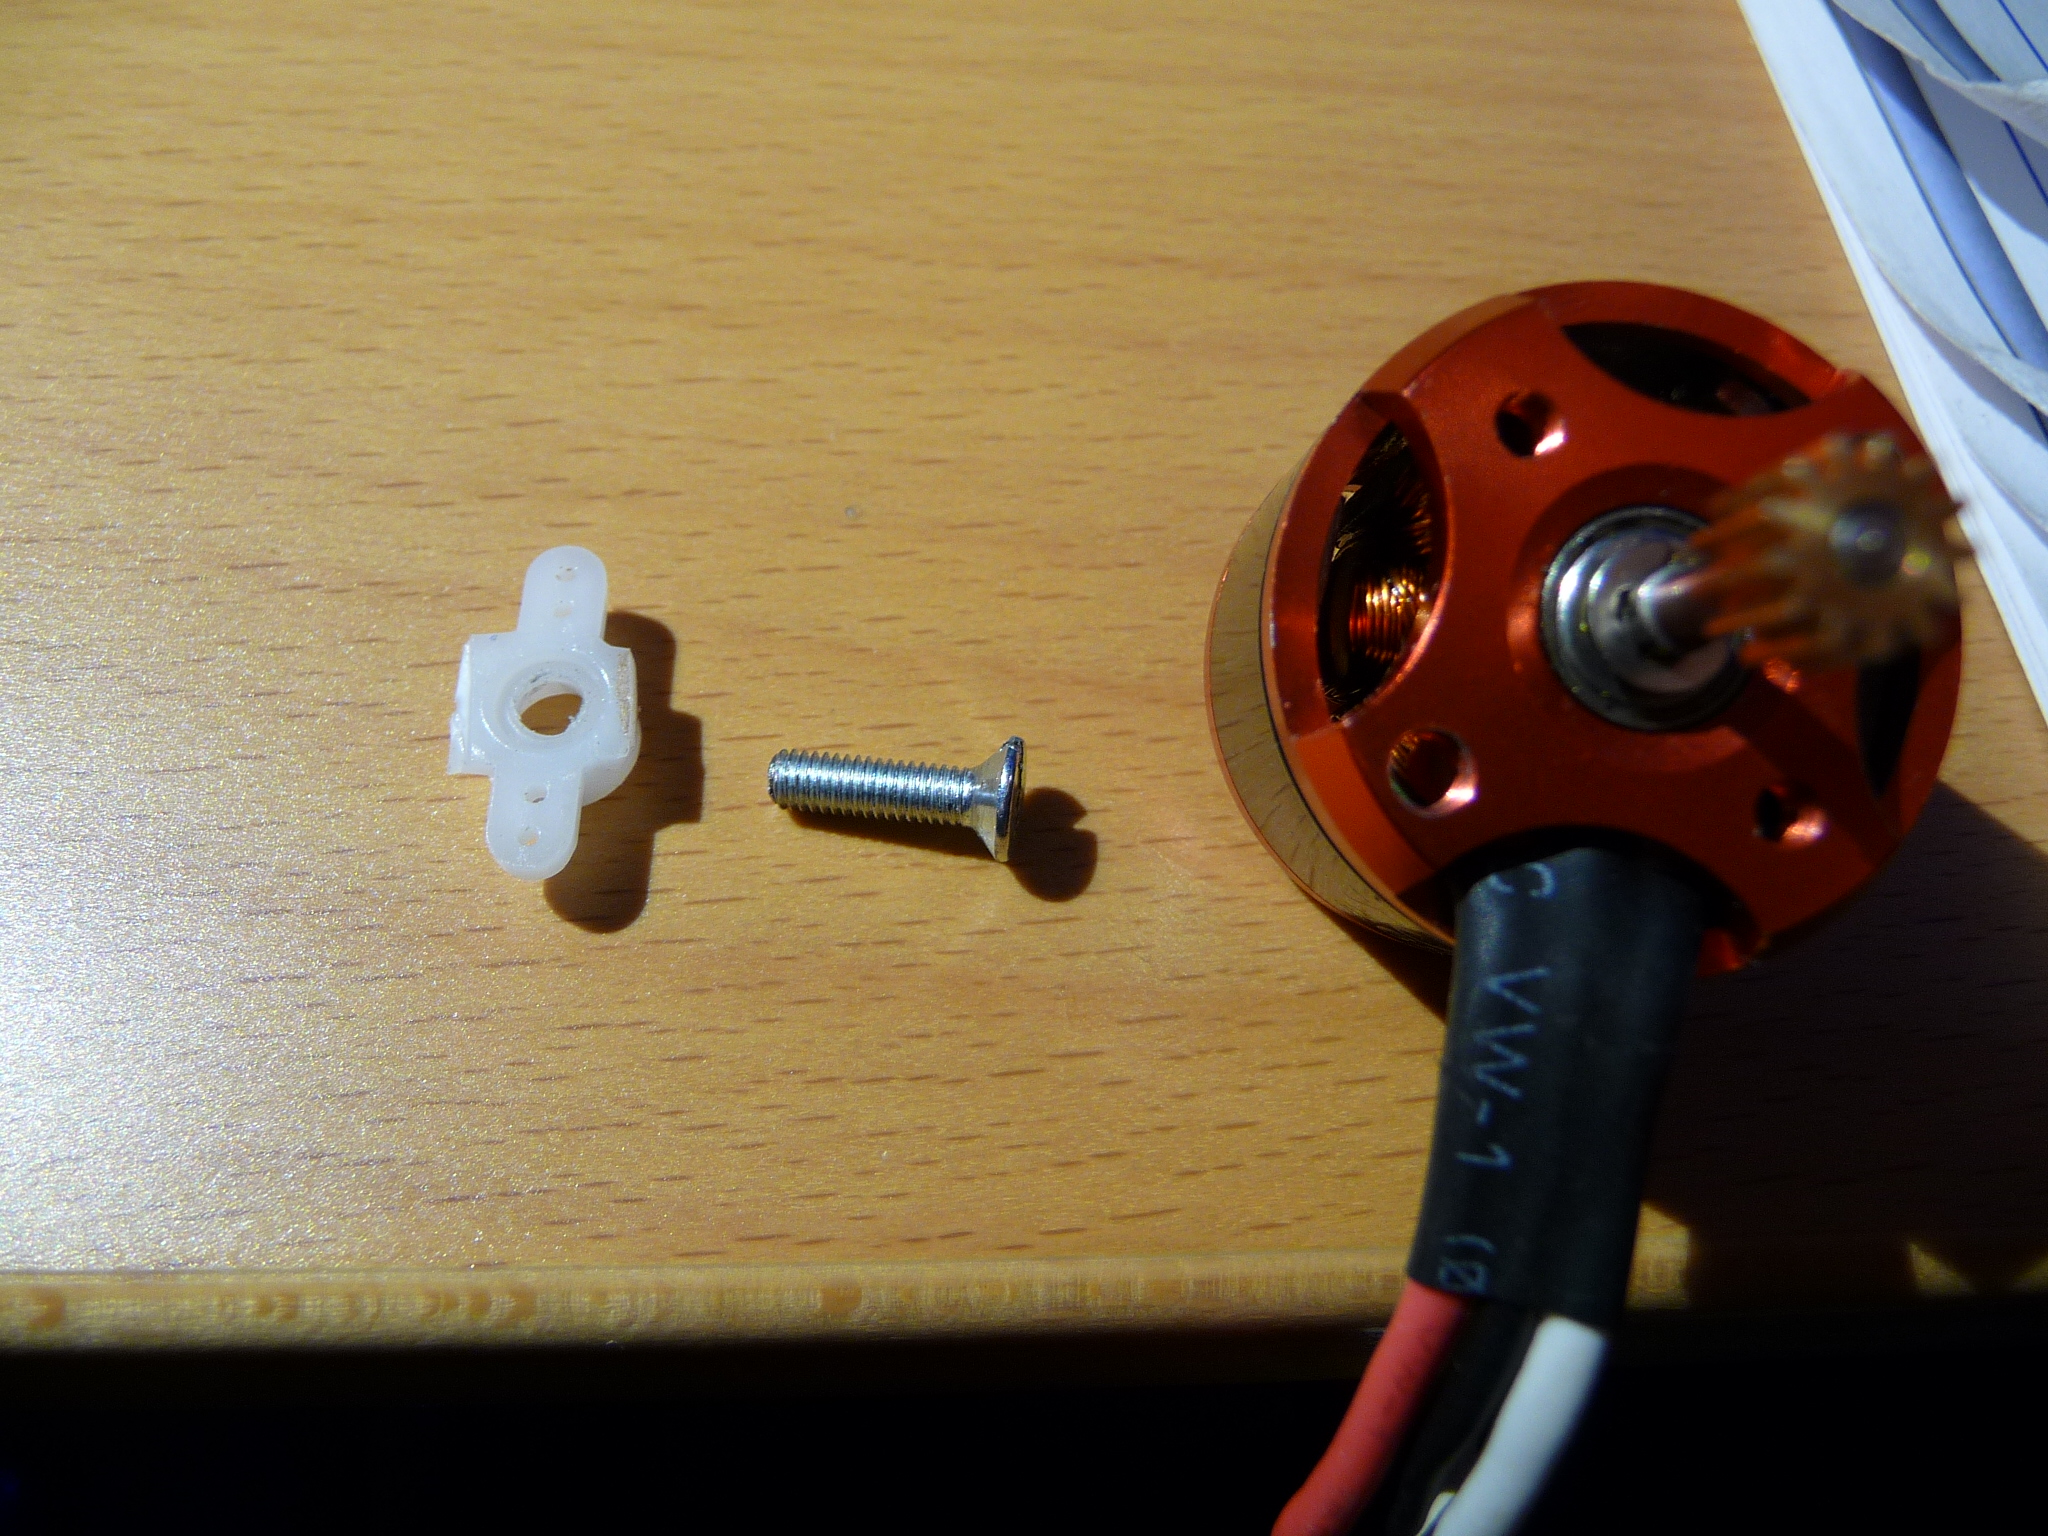 Cut down M3 screw and spacer made from a servo arm with the arms cut off